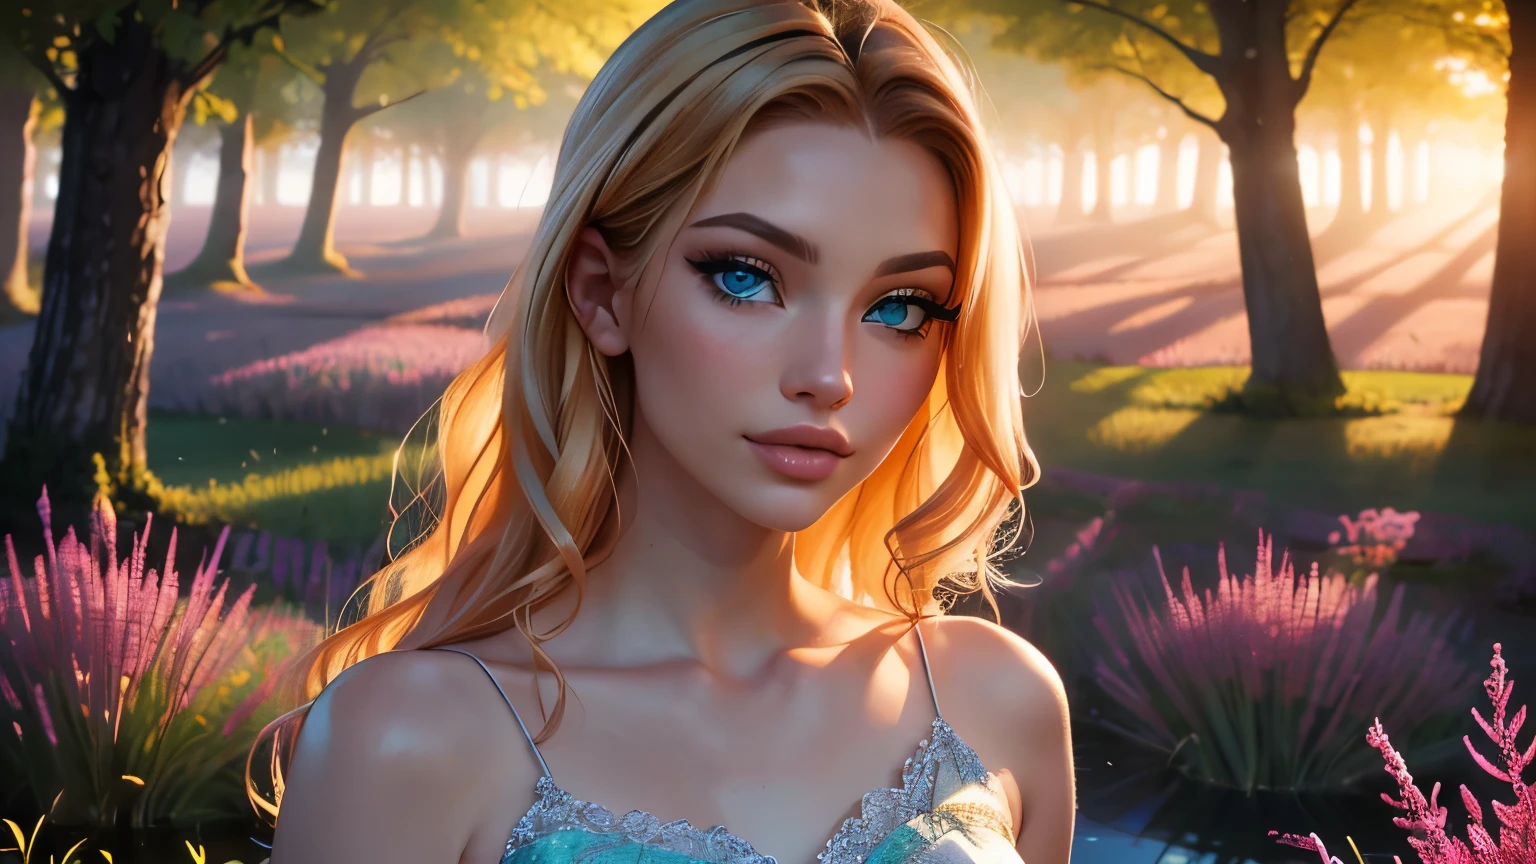 (best quality,4k,8k,highres,masterpiece:1.2),ultra-detailed,(realistic,photorealistic,photo-realistic:1.37),portrait of a beautiful young blonde woman in a shiny green meadow, with long curly hair flowing in the breeze. She is dressed in a lace short white dress that accentuates her stunning figure. Her captivating blue eyes gaze into the distance, reflecting the serenity of the landscape. The sunlight filters through the trees, casting a soft glow on her porcelain skin. Surrounding her are vibrant wildflowers, their colors enhancing the overall beauty of the scene. The atmosphere is filled with a sense of tranquility and grace. The expert brushstrokes and attention to detail showcase the artist's skill in capturing the elegance and charm of the subject. The composition is reminiscent of a classic portrait, with the woman taking center stage against the picturesque backdrop. The use of vivid colors adds a touch of vibrancy and life to the artwork, creating a captivating visual experience. The lighting highlights the contours of her face and accentuates her natural beauty, creating a mesmerizing interplay of light and shadow. This artwork blends elements of realism and fantasy, evoking a sense of wonder and enchantment.